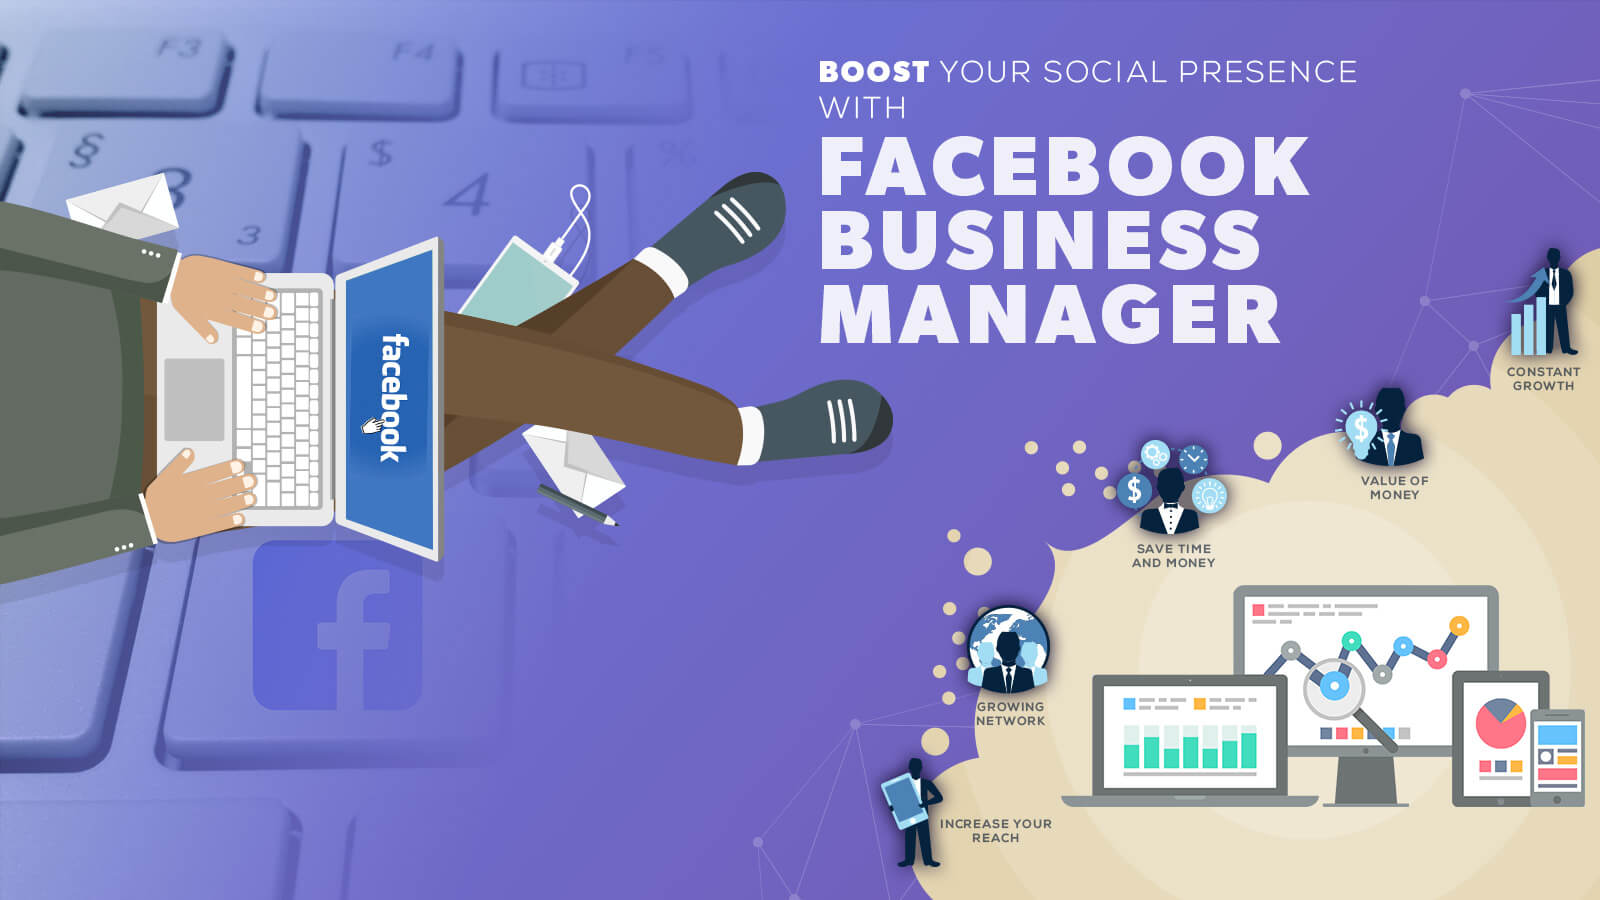 Why You Should Use Facebook Business Manager for Facebook Marketing Campaigns